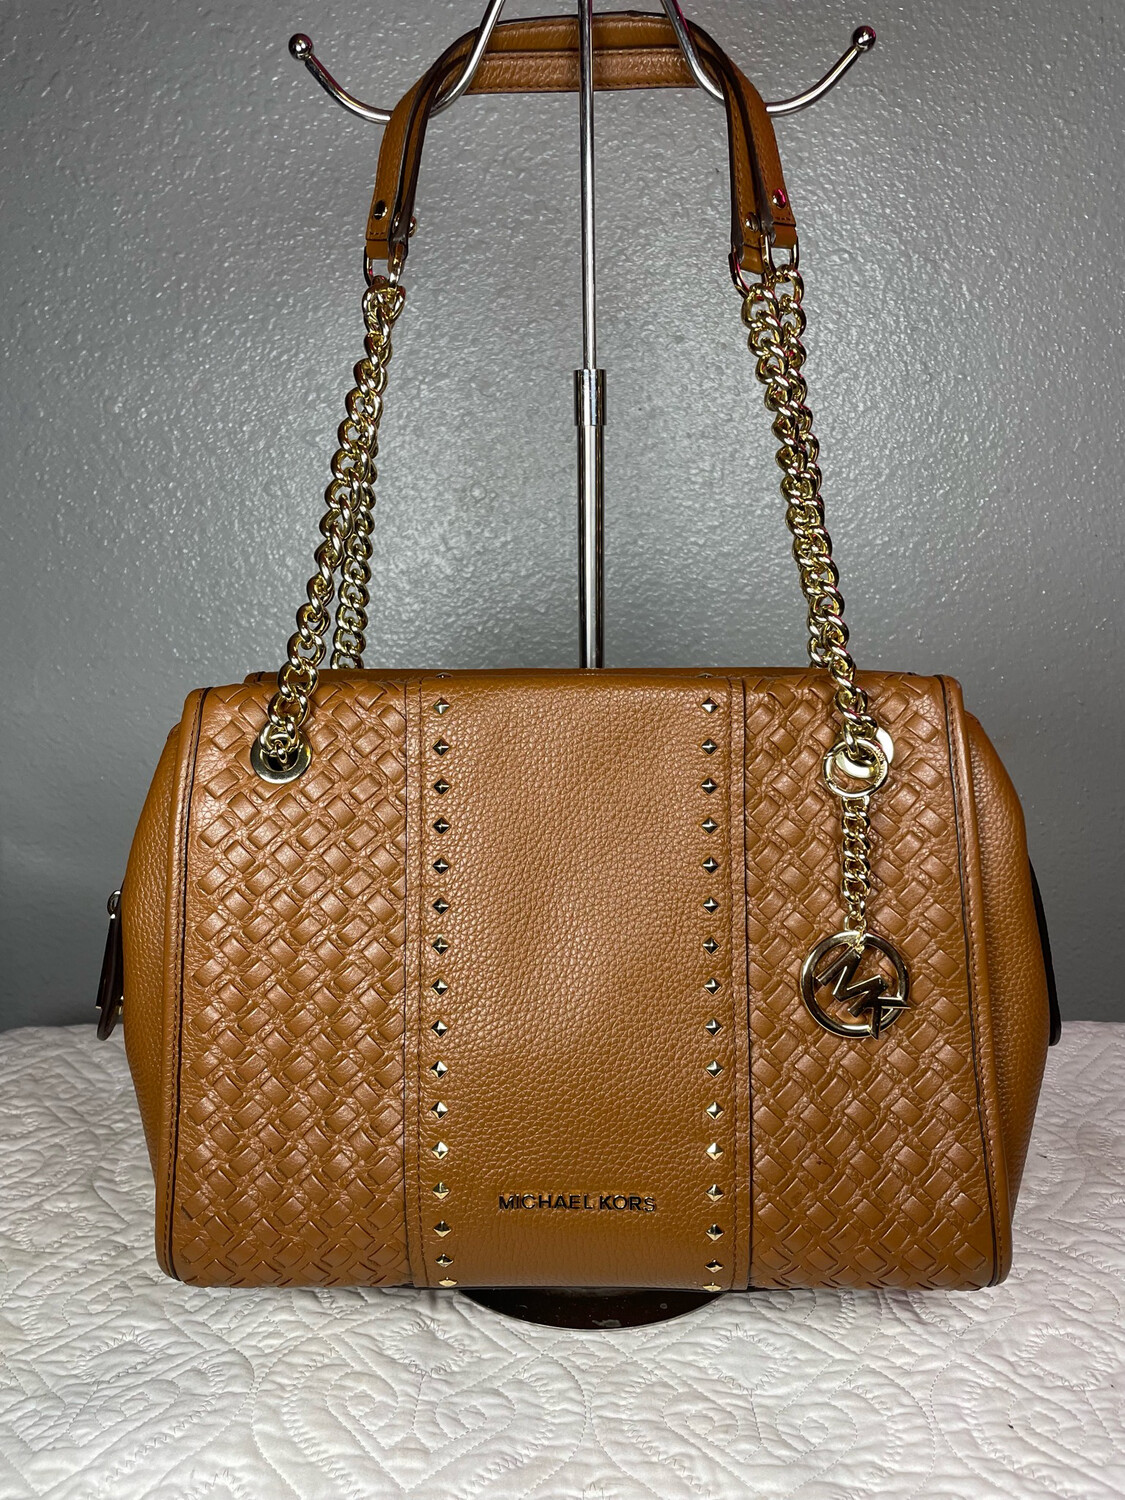 Michael Kors Brown Studded Woven Leather with Gold Chain Tote